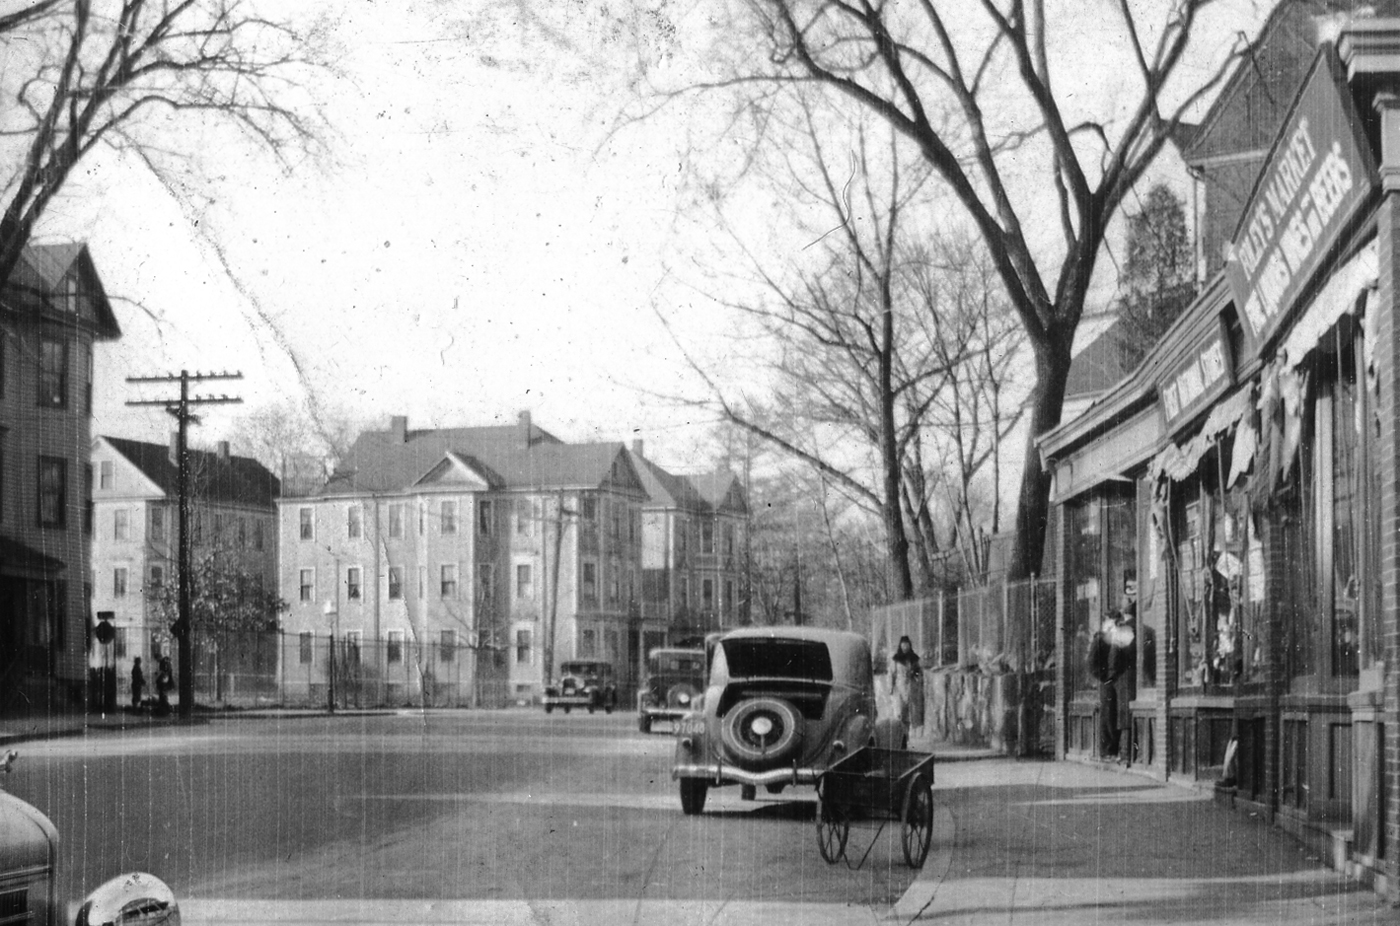 Cypress St. and Foley's Market, 1937